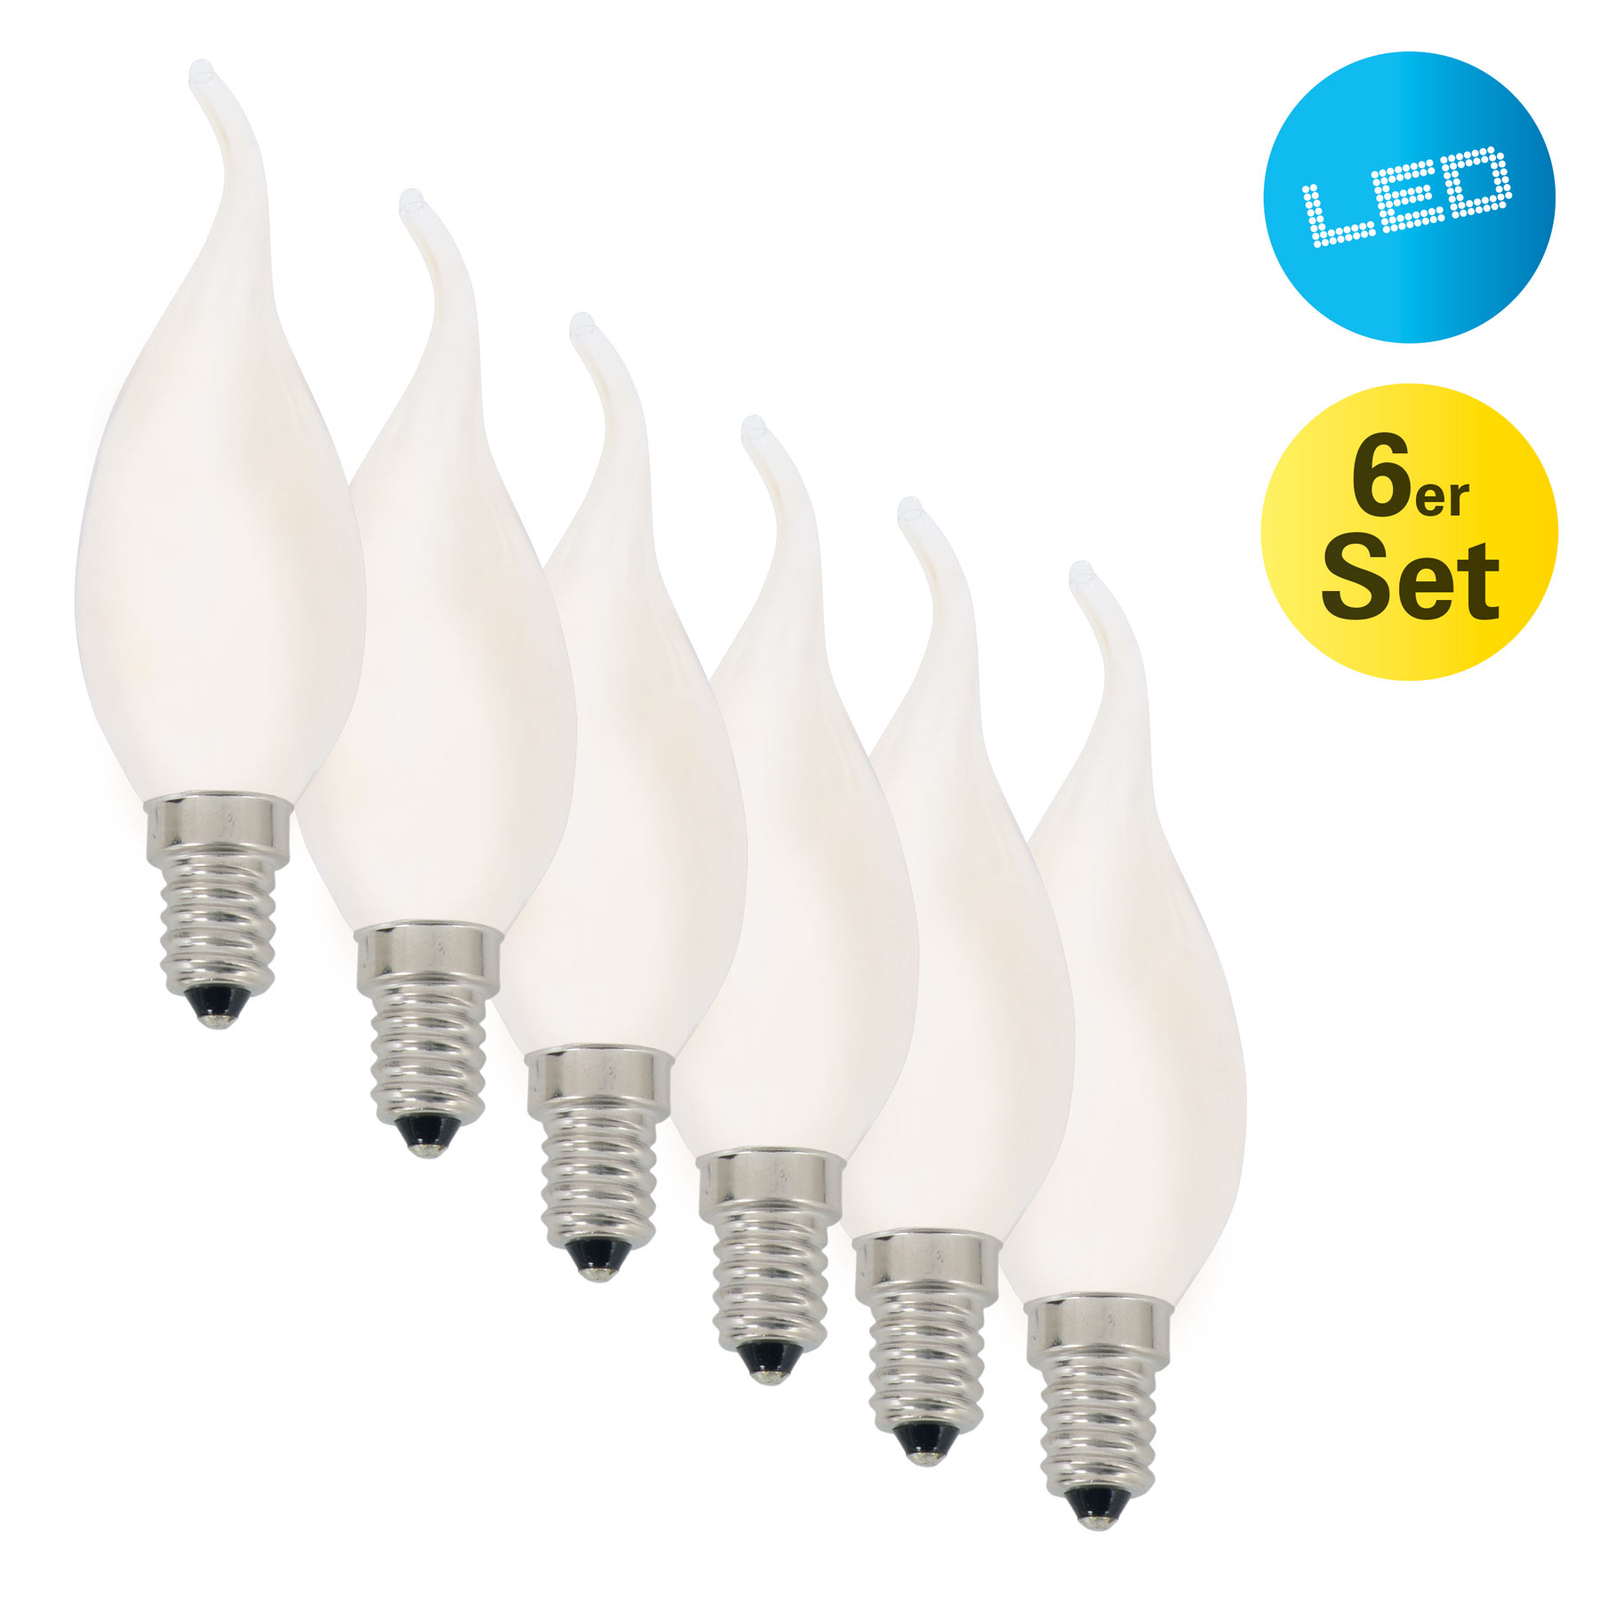 Bougie LED flamme E14 4W 450lm blanc chaud, pack 6